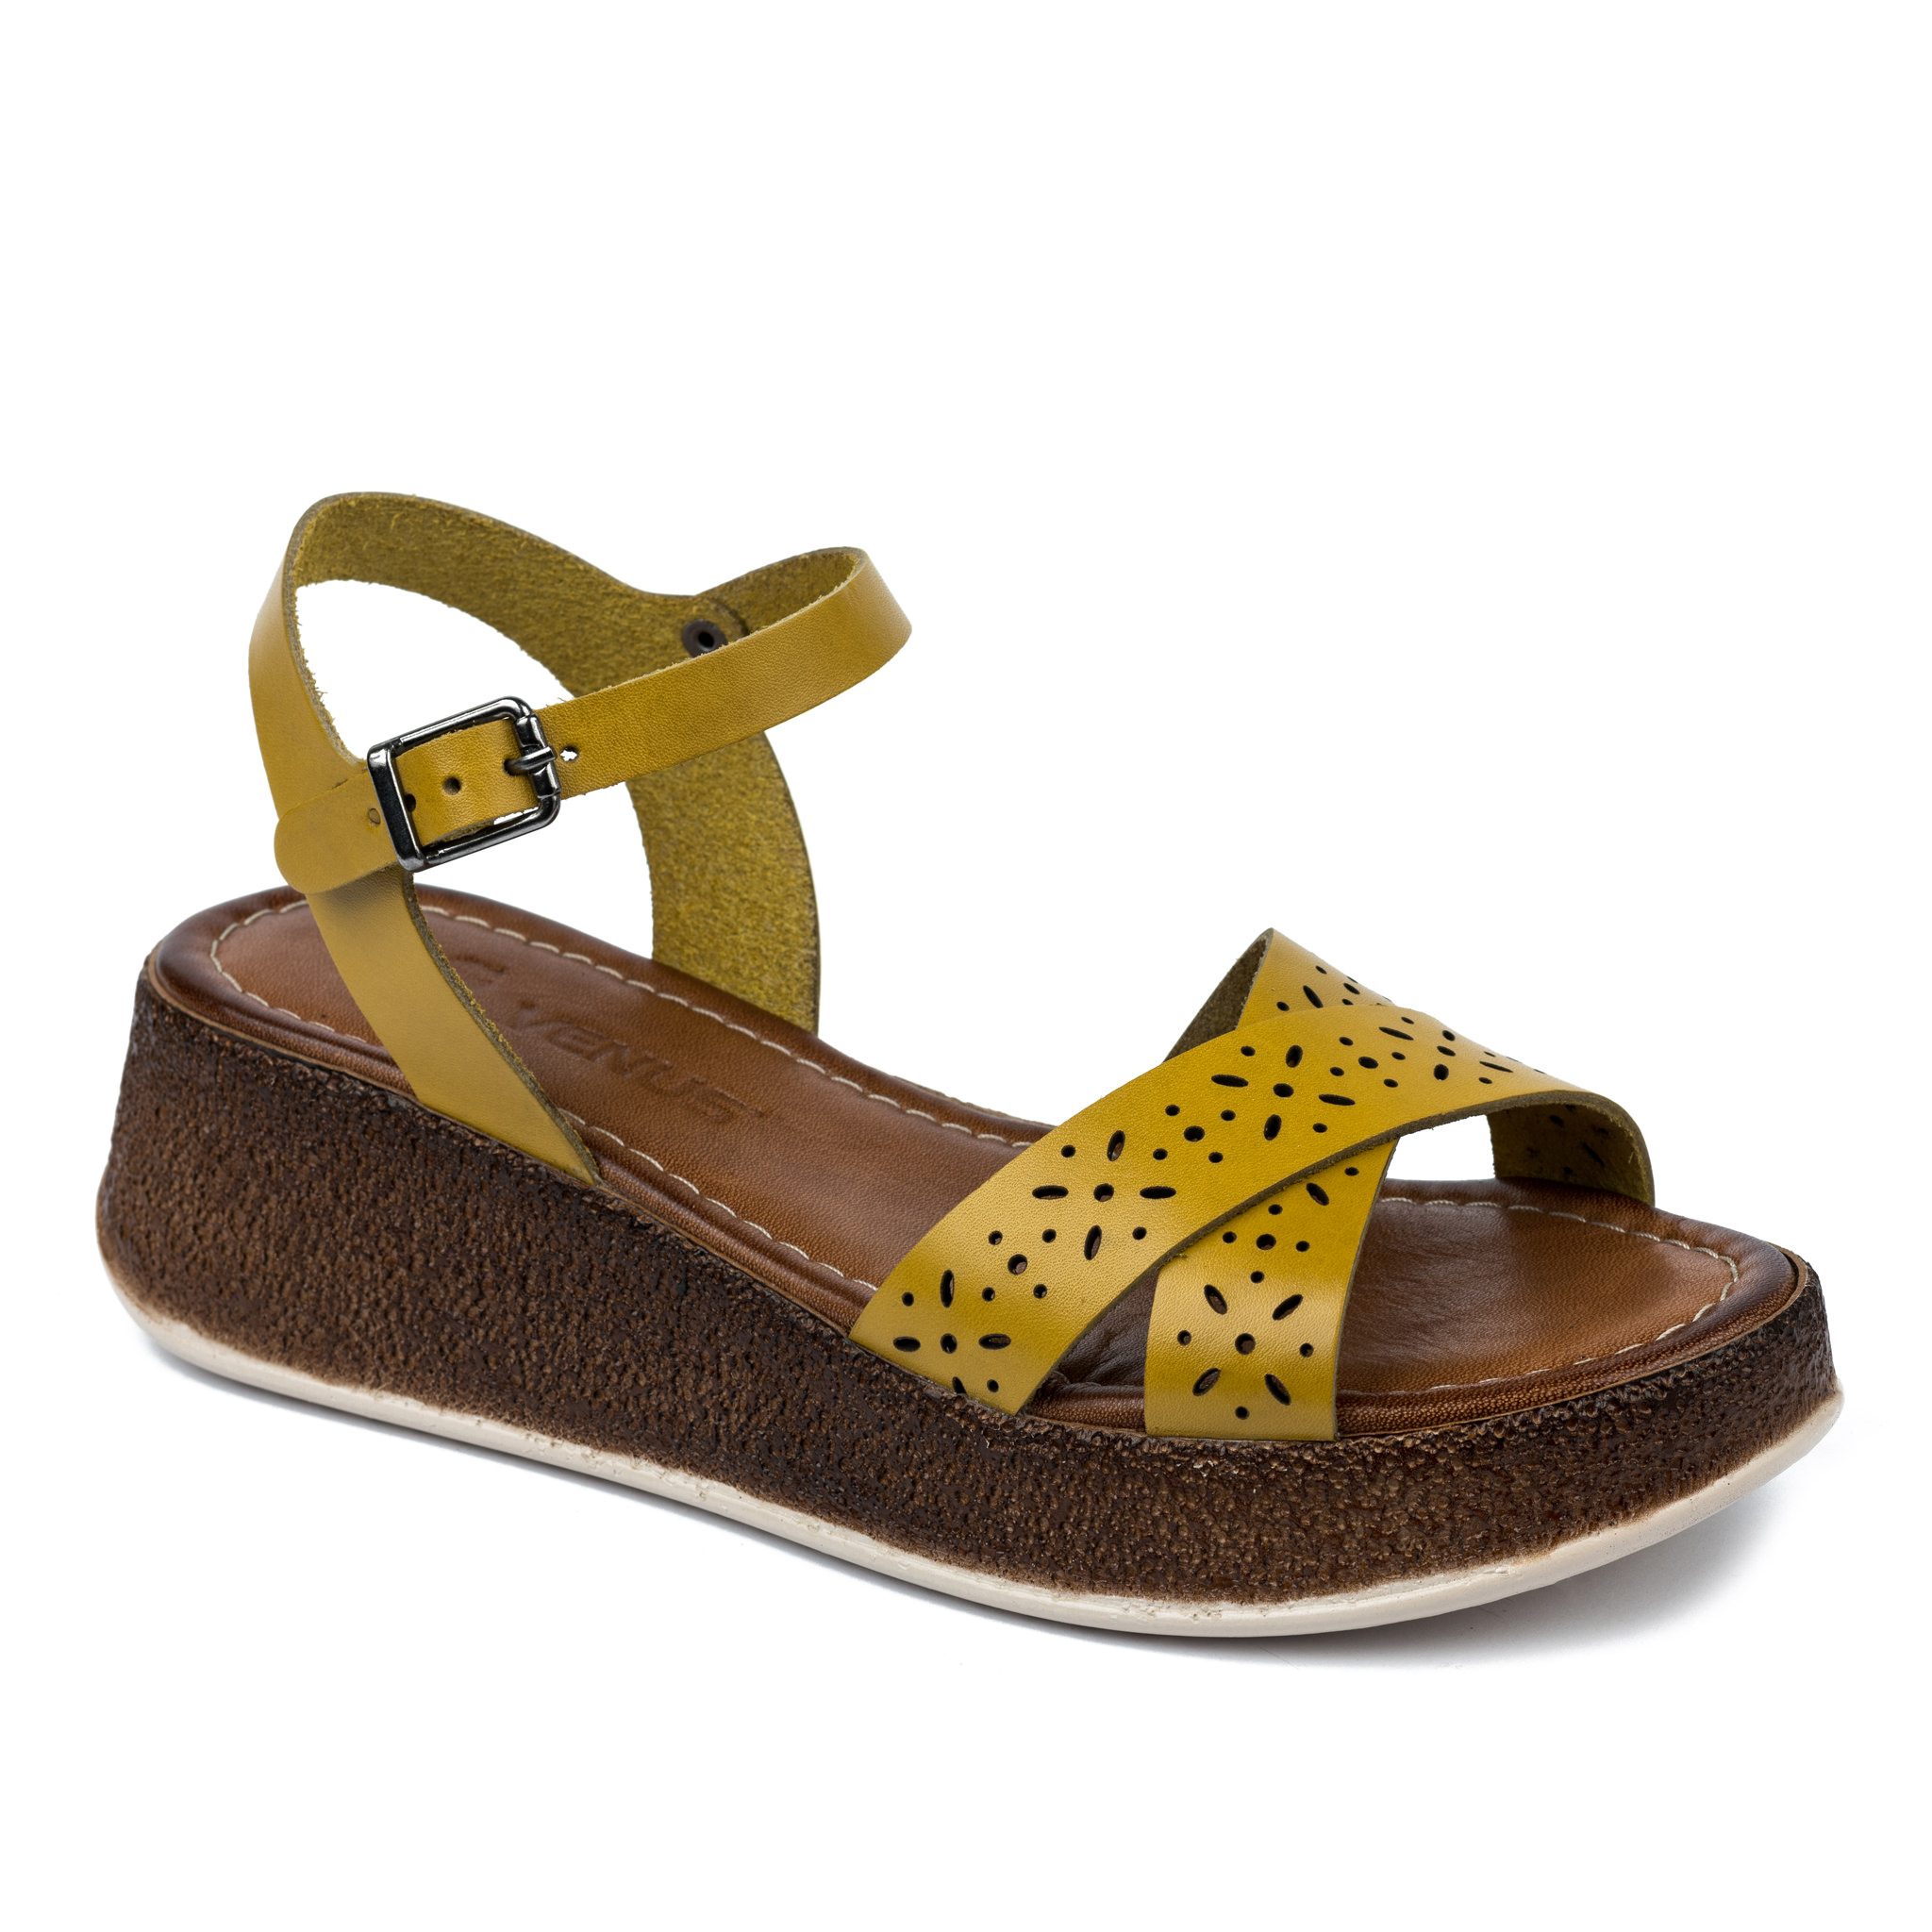 Leather sandals A648 - OCHRE